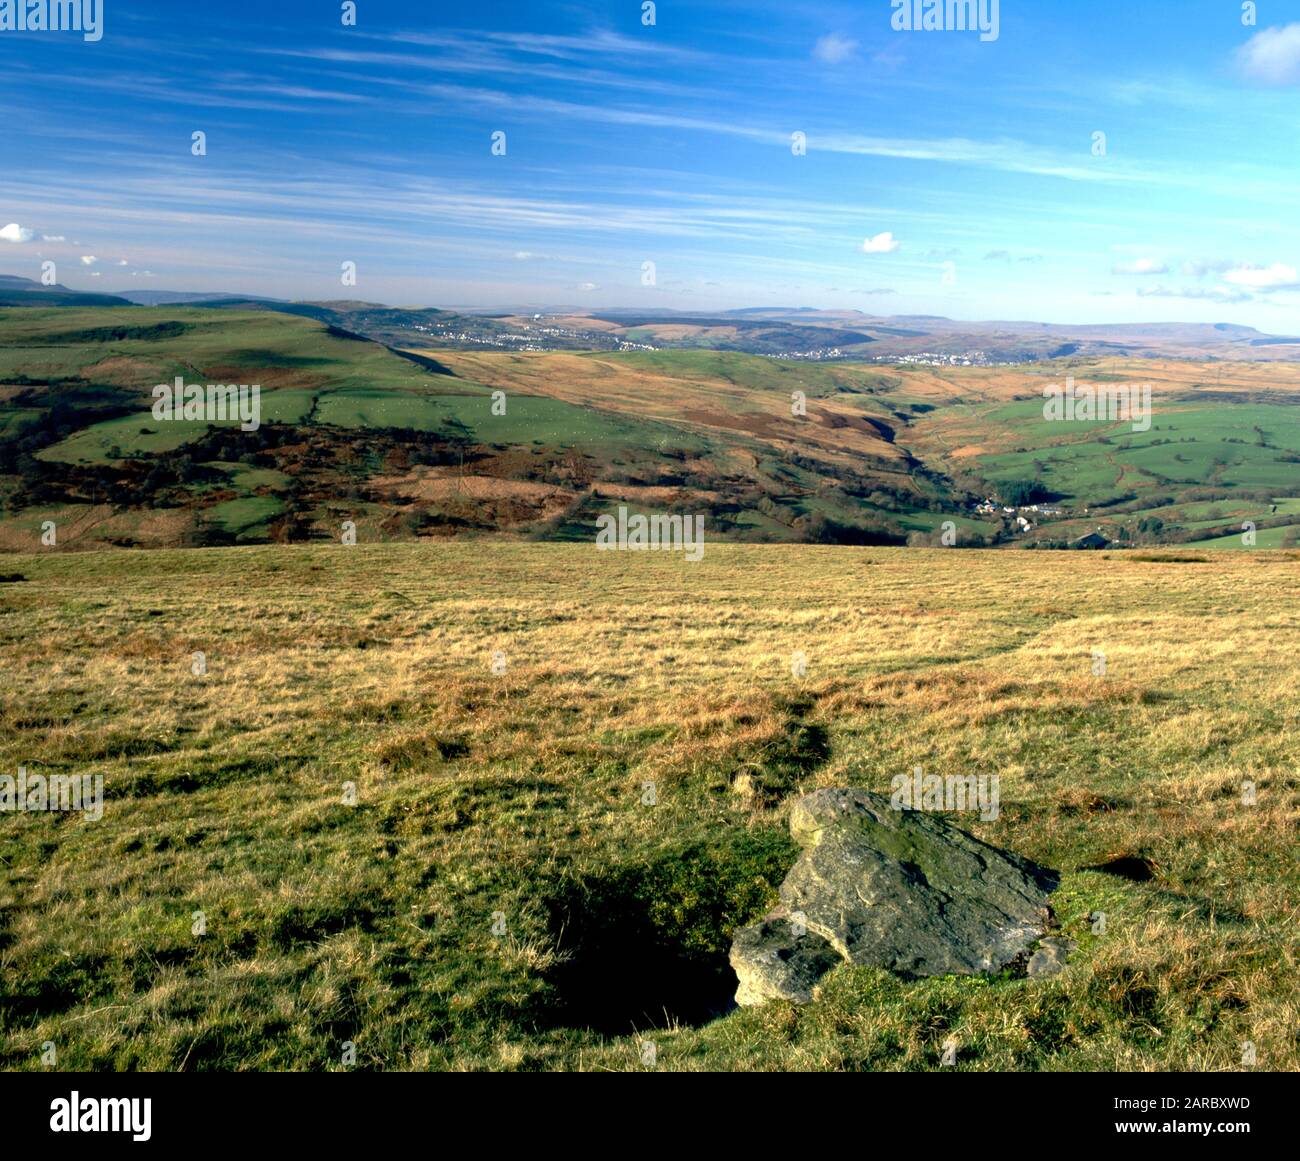 View looking across the Heads of the Valleys towards the Brecon Beacons from Pen Garnbugail, Gelligaer Common near Merthyr Tydfil South Wales Stock Photo